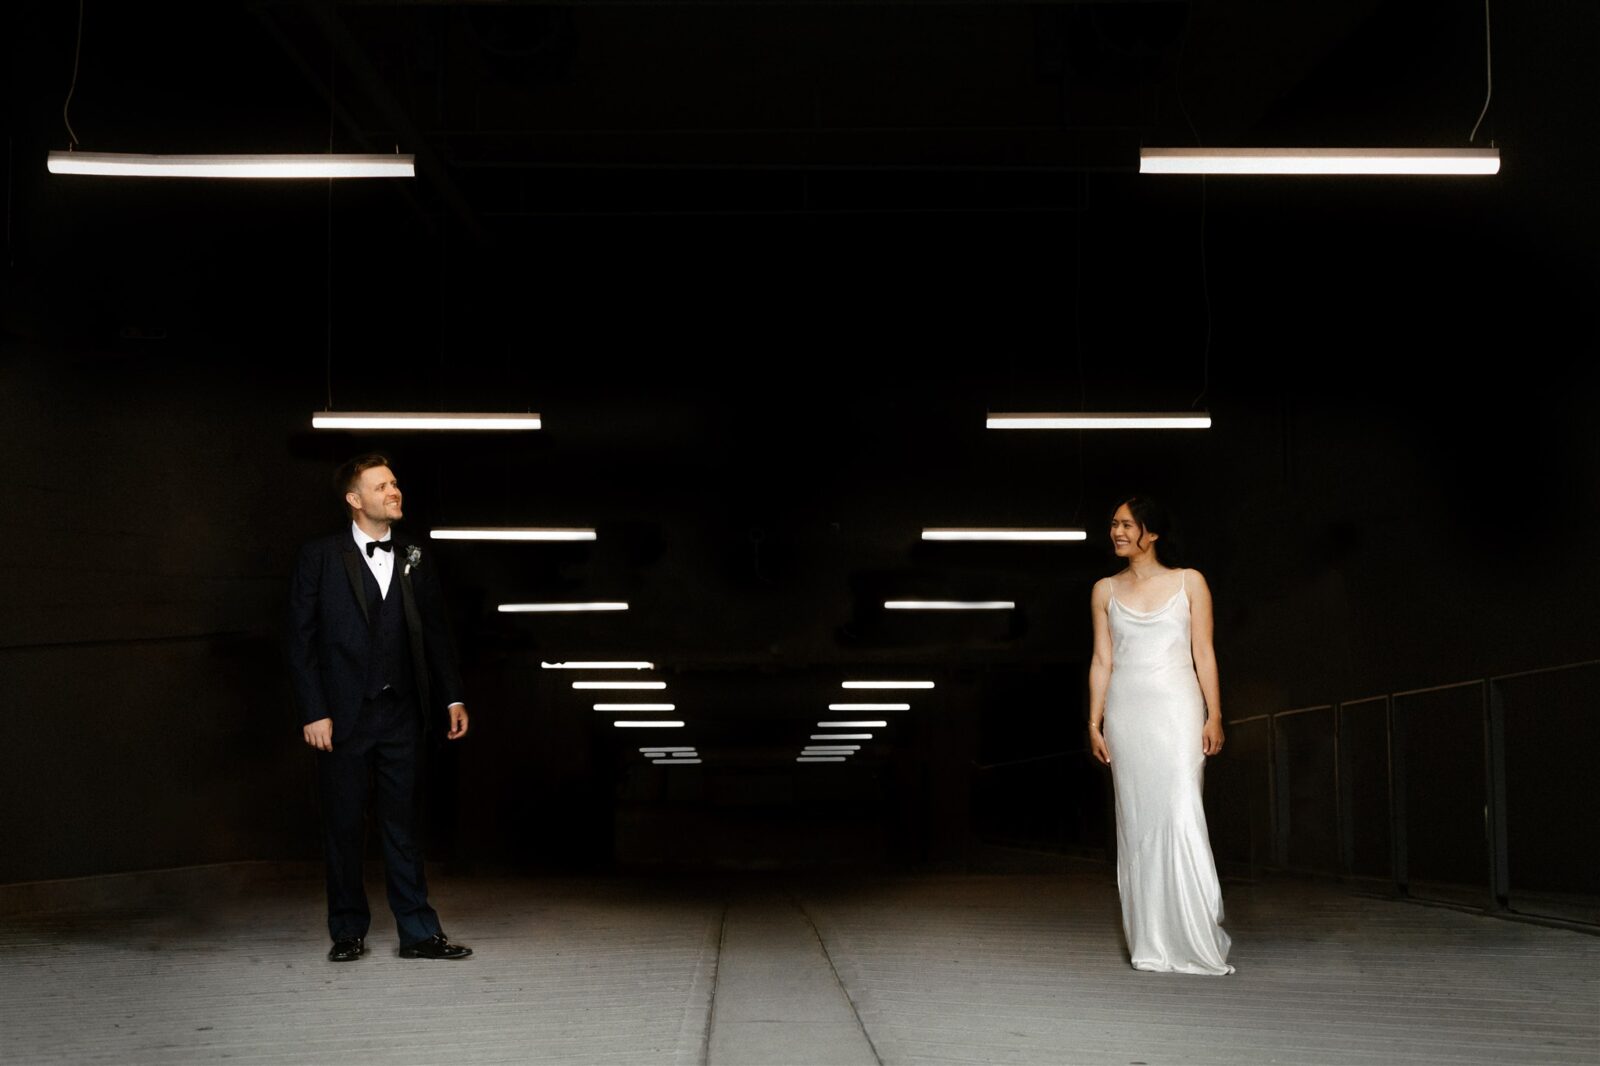 Downtown Vancouver wedding inspiration. Bride wearing sleek satin bridal gown from Park and Fifth. 